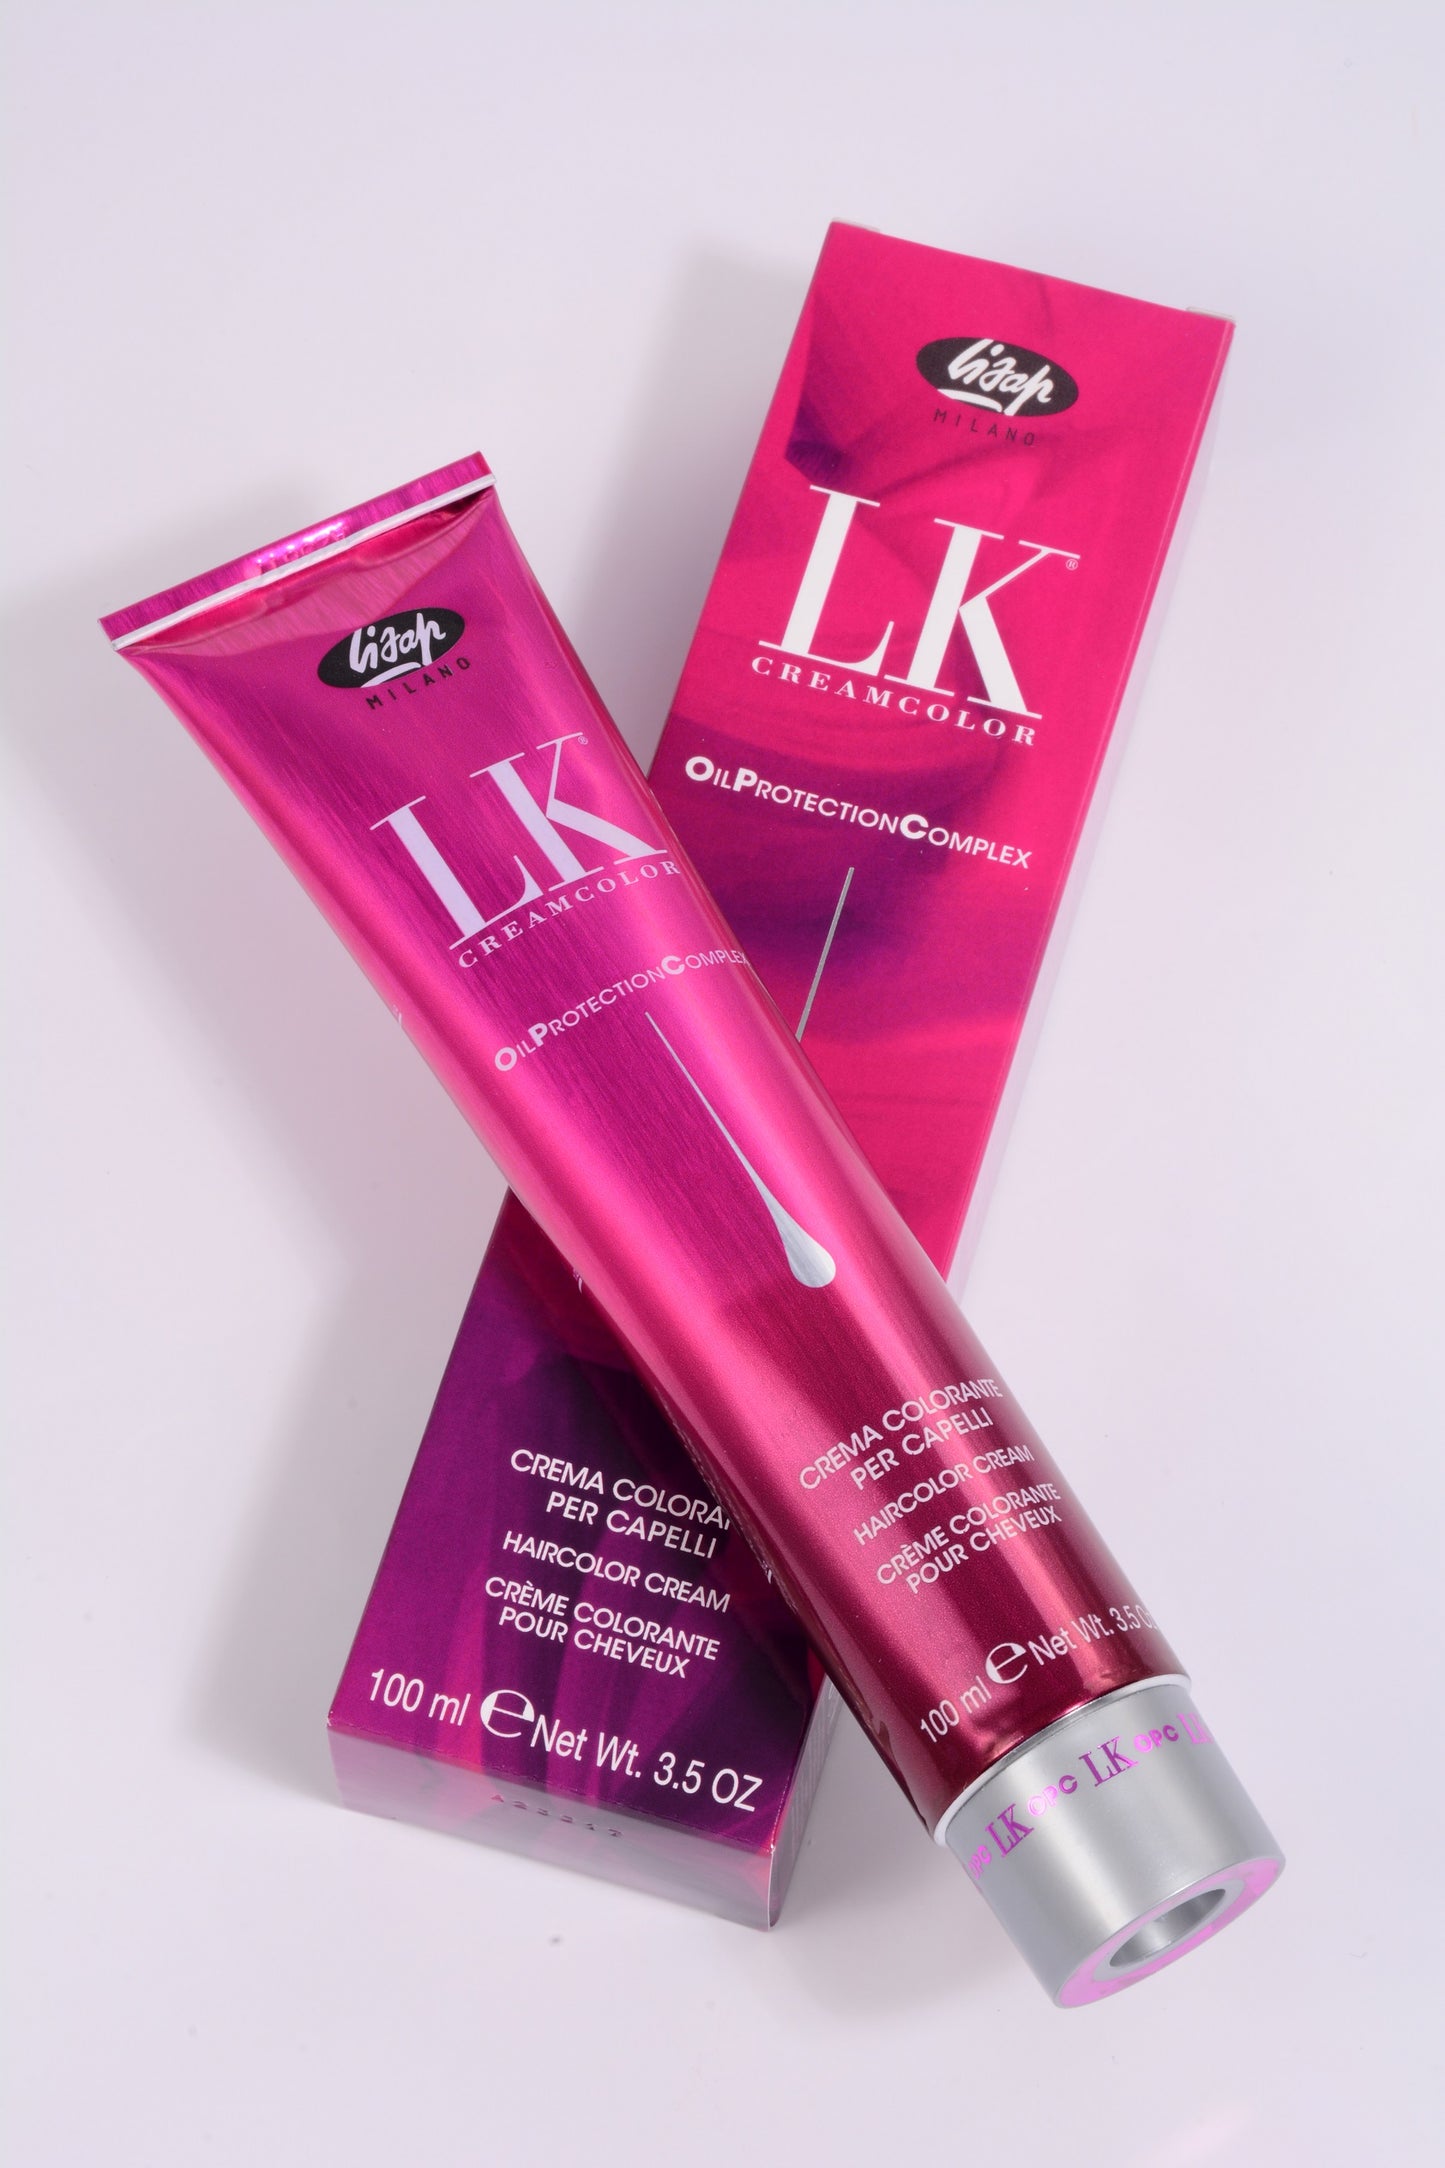 LK Creamcolor 9/73 Oil Protection Complex